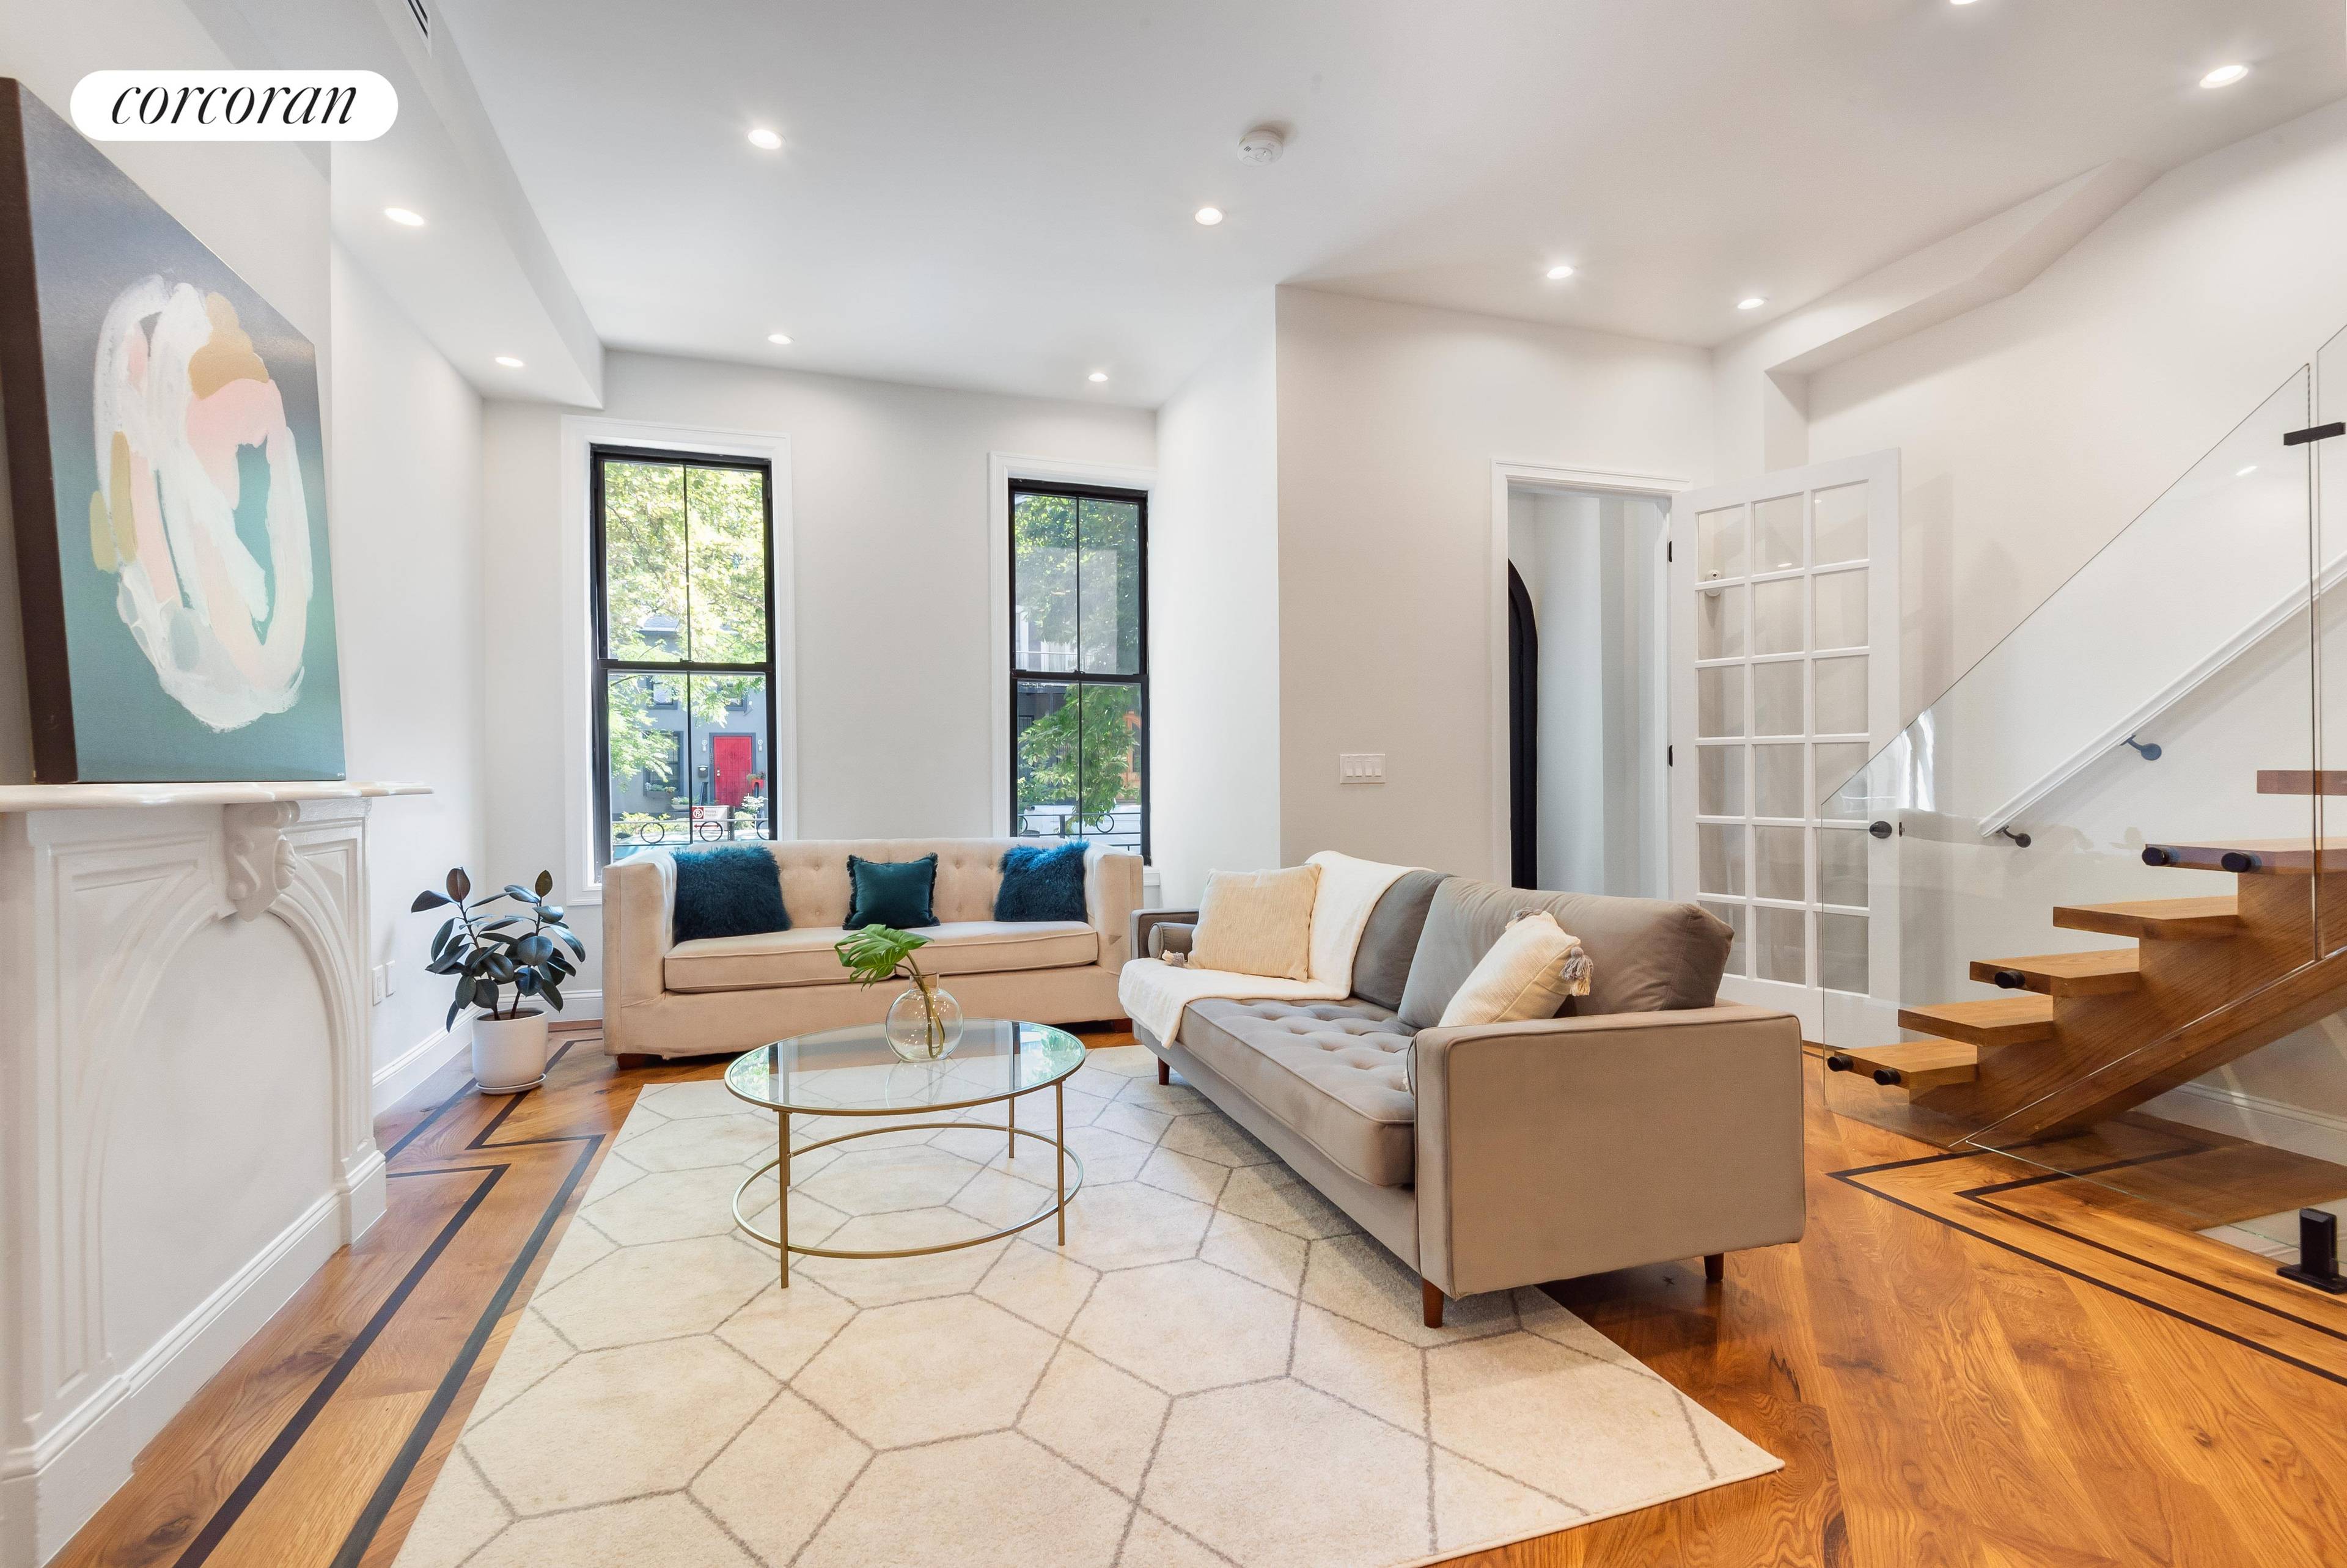 Welcome to 167 Monroe Street, a top to bottom, gut renovated single family townhouse, situated between Nostrand and Bedford Avenues, in PRIME Bedford Stuyvesant.